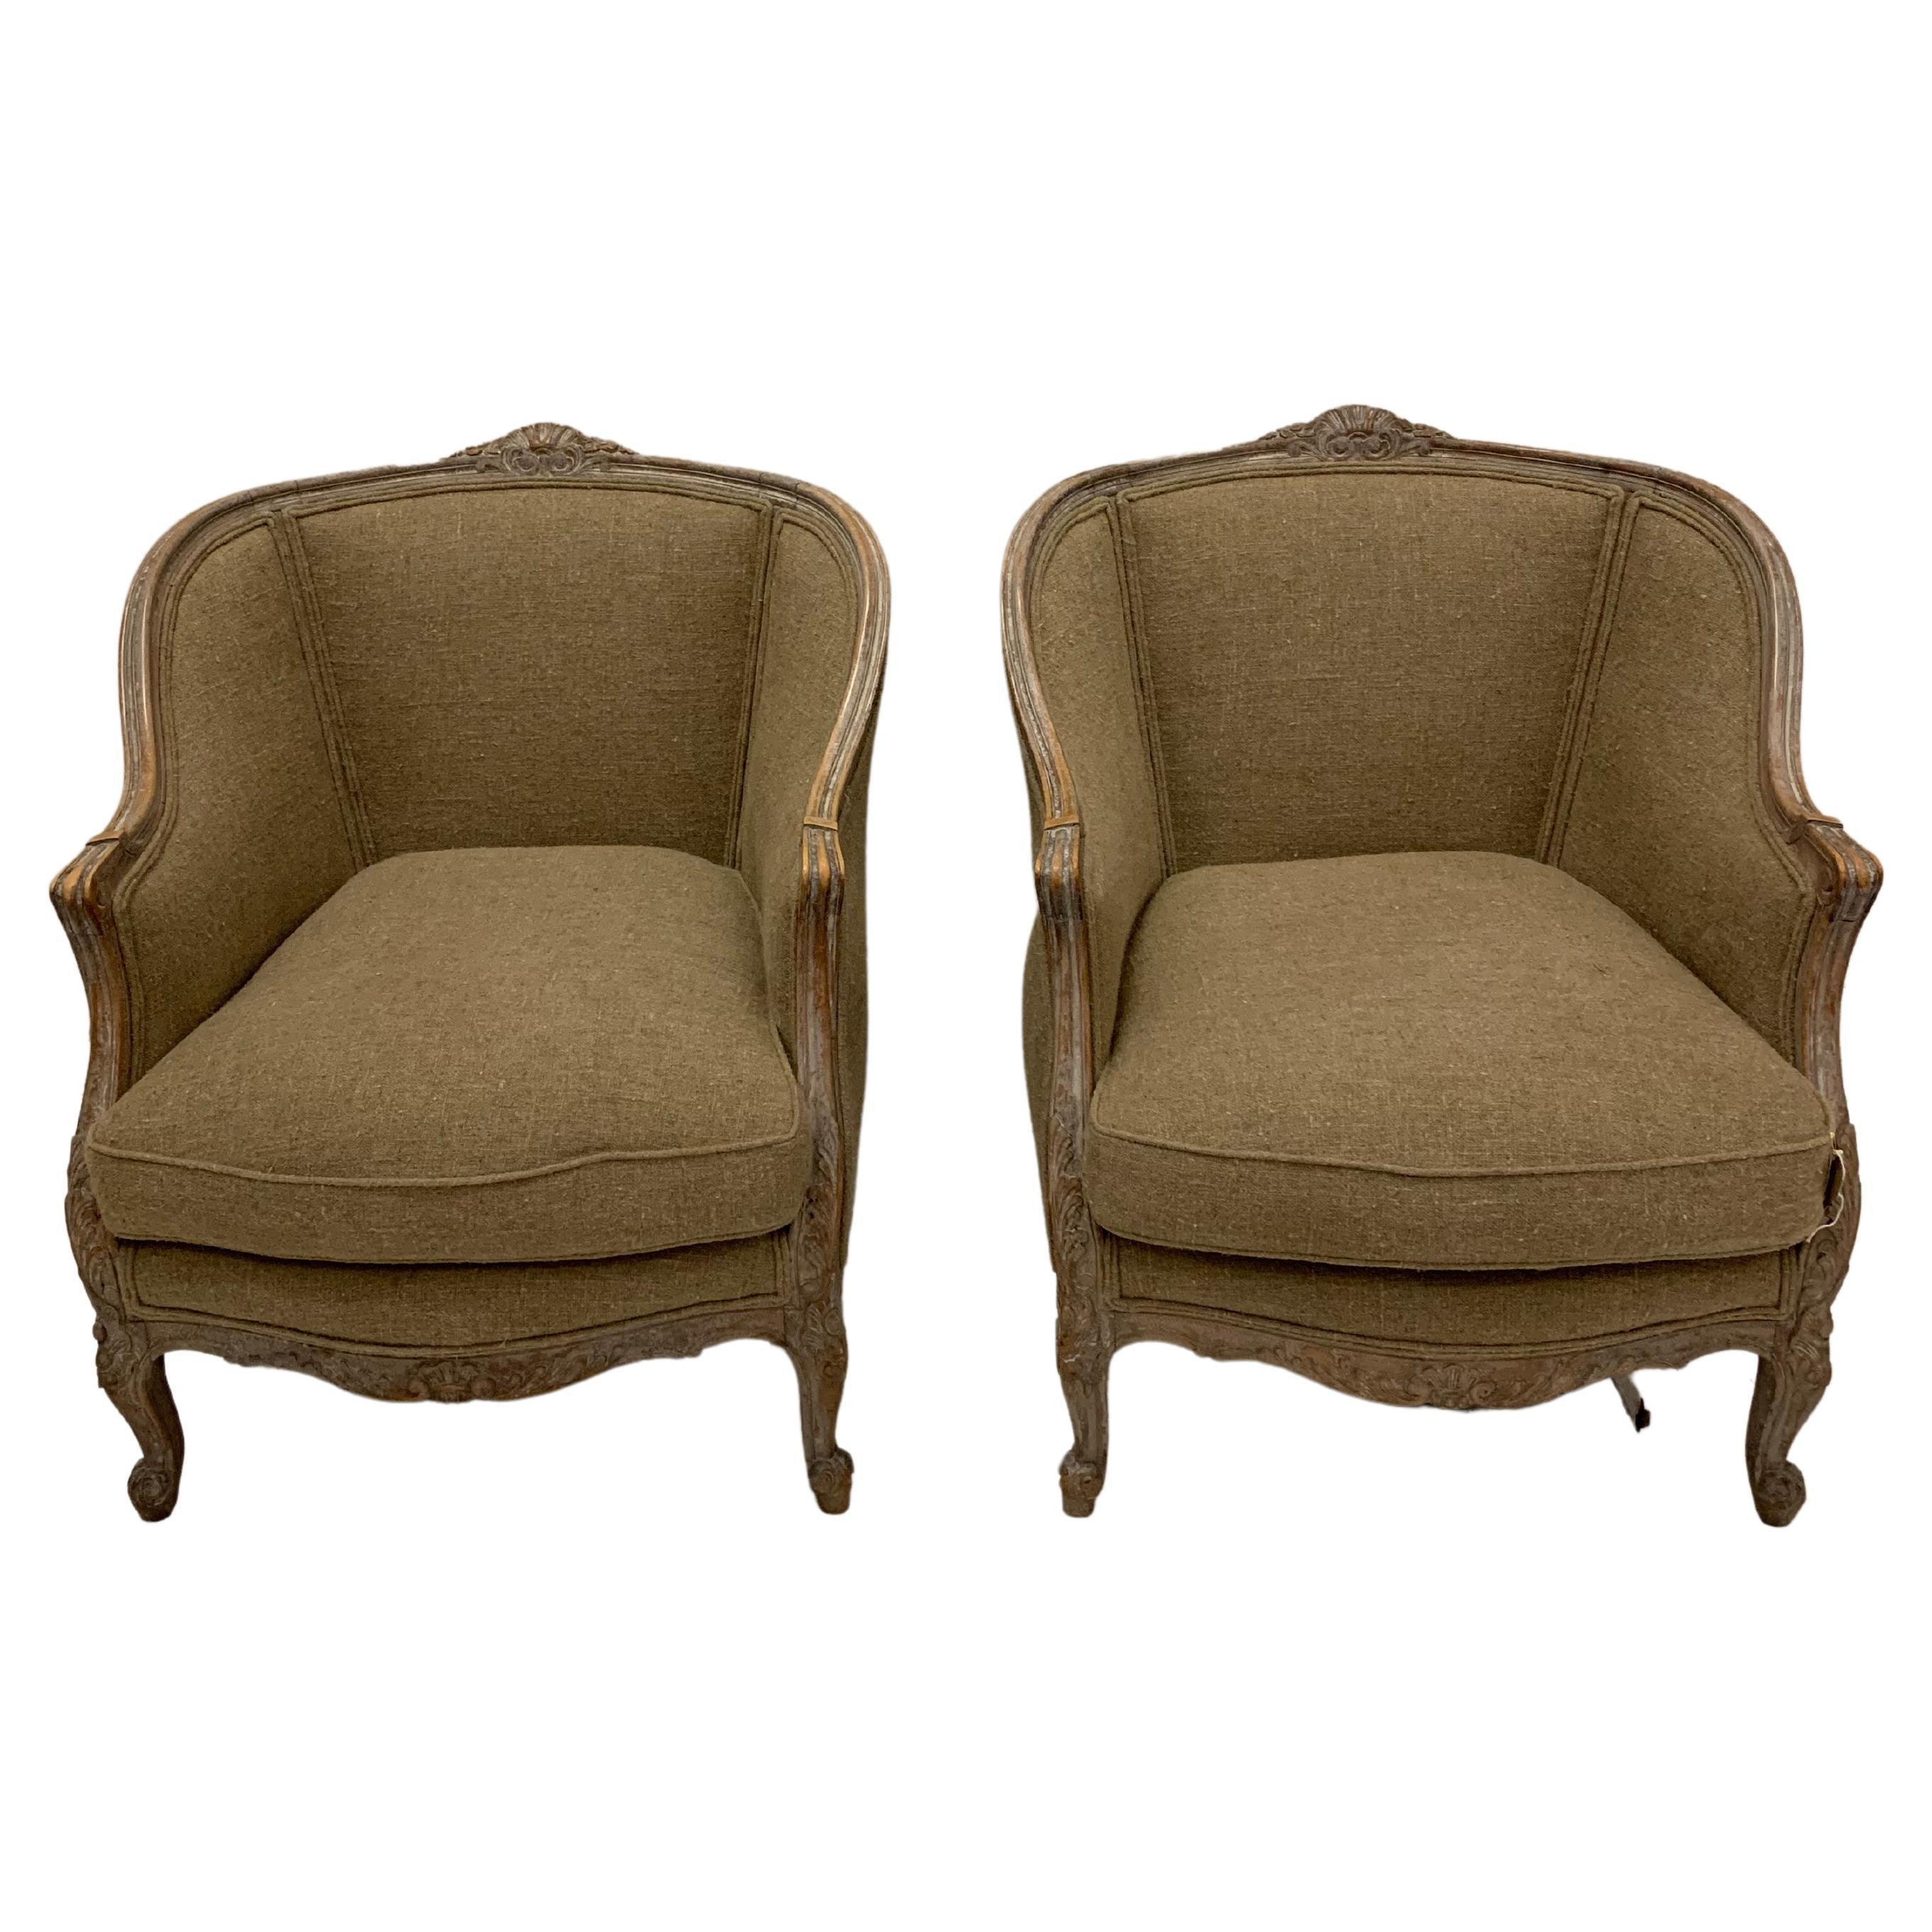 Pair of 1920s Swedish Fauteuils Armchairs Upholstered in Mid-Taupe Linen Fabric For Sale